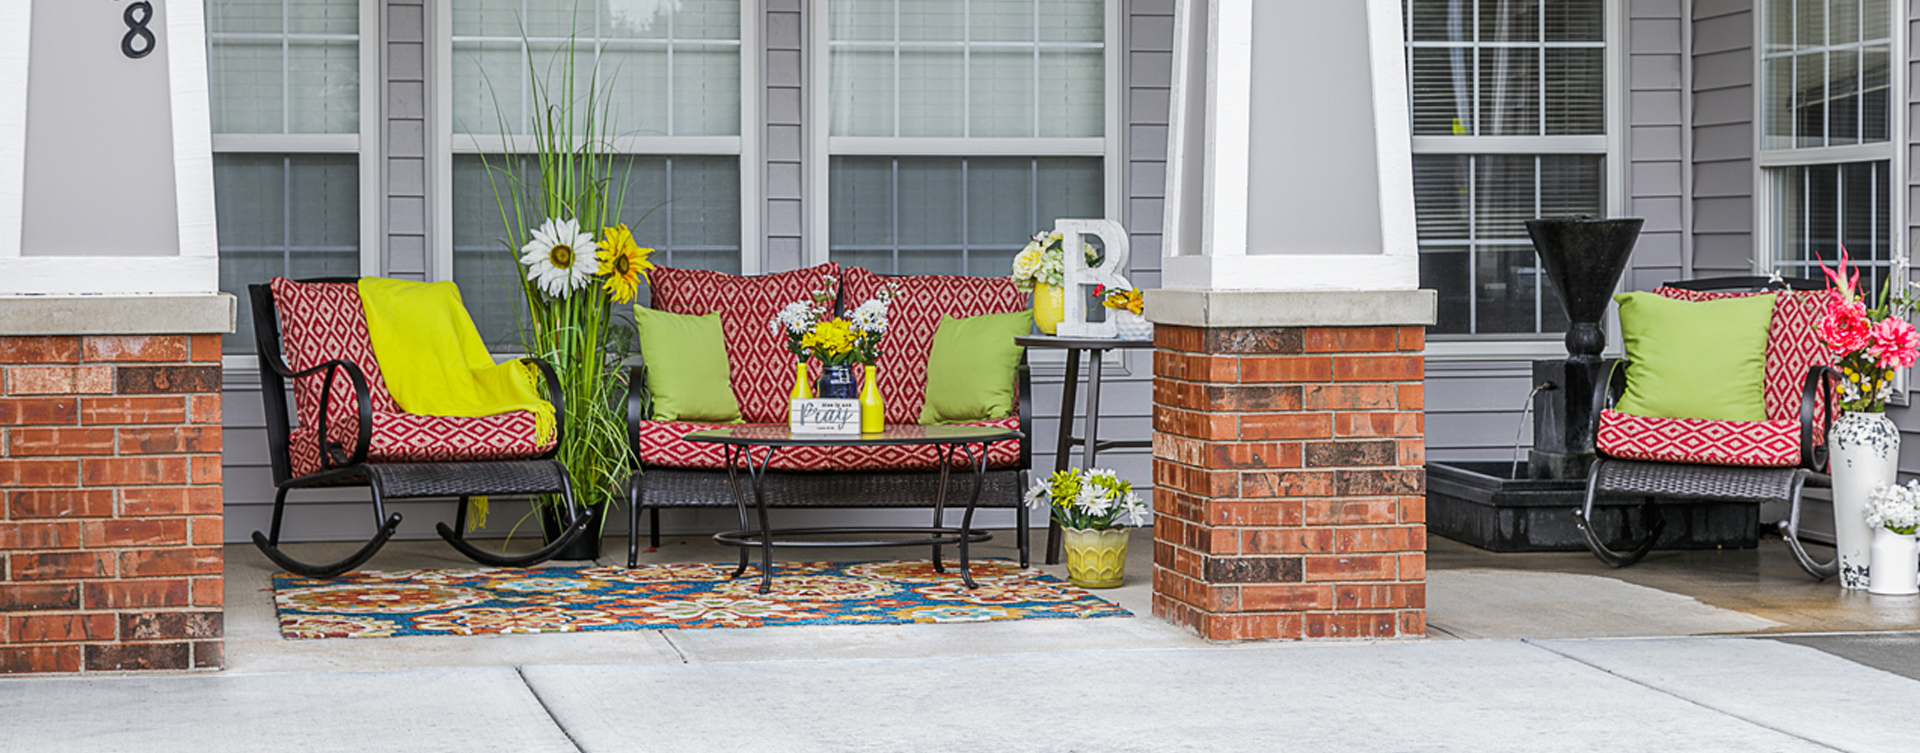 Relax in your favorite chair on the porch at Bickford of Omaha - Blondo